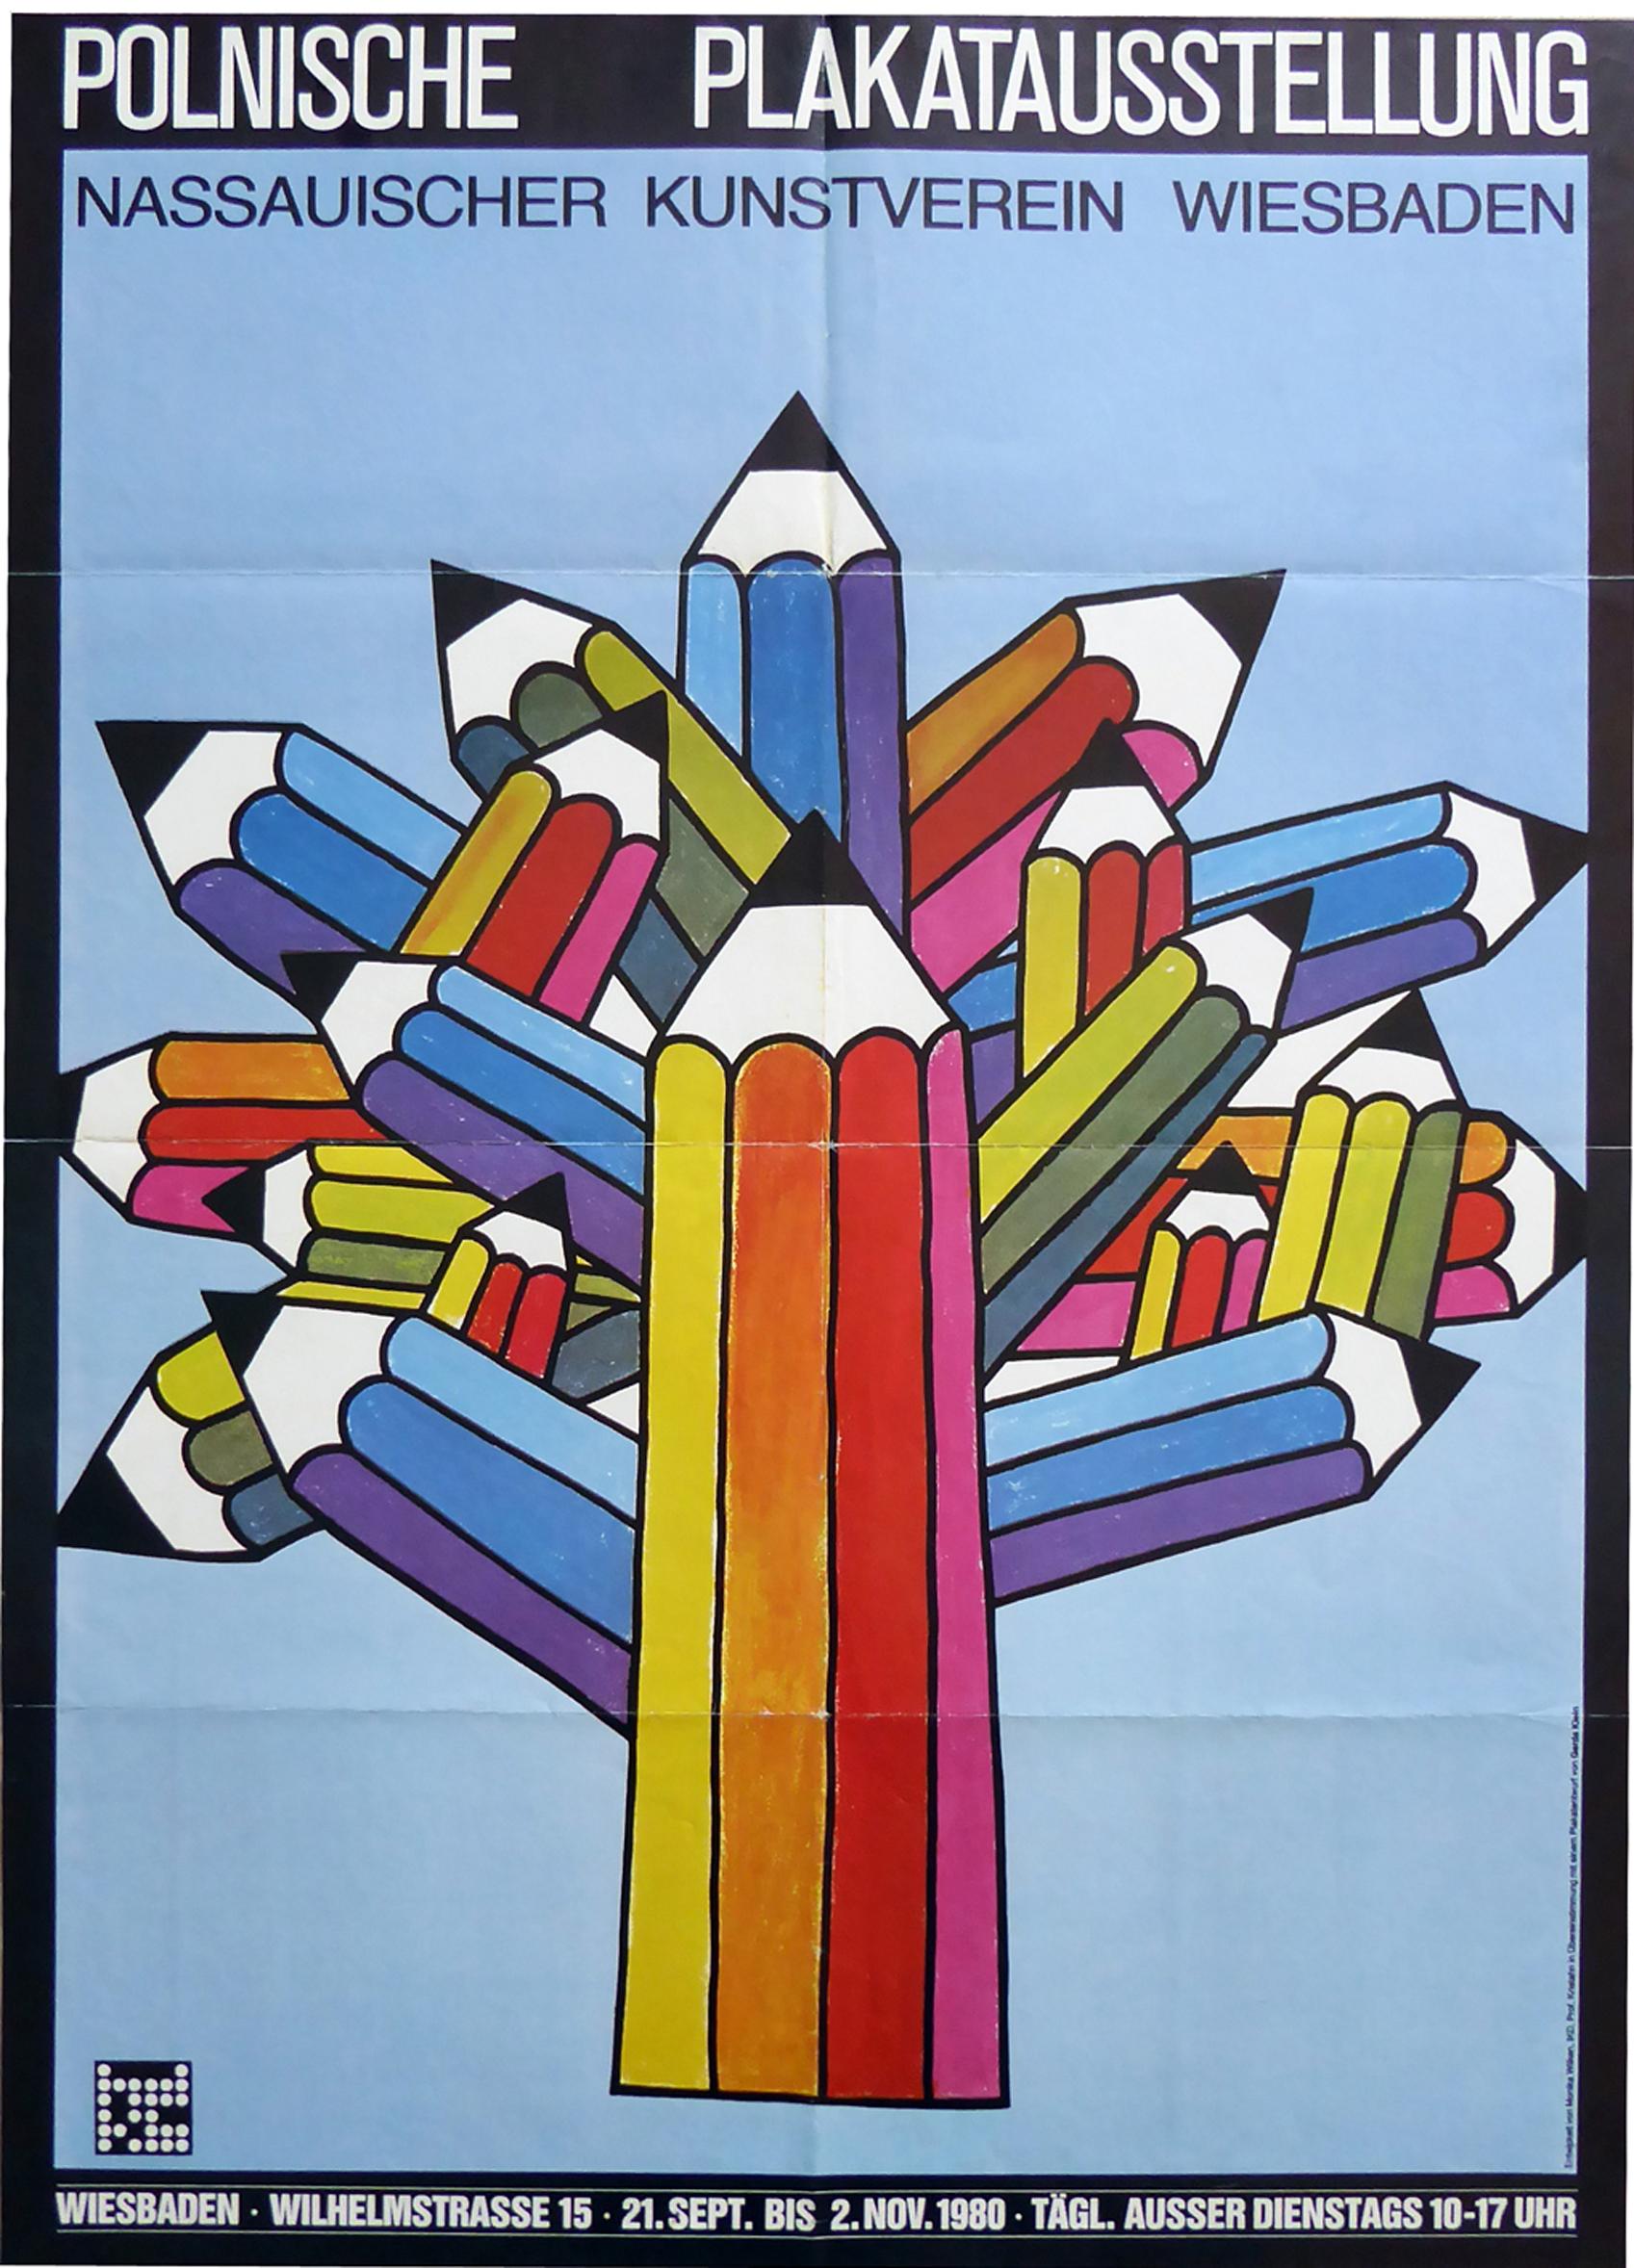 Original 1982 promotional poster for the German polish poster exhibition at the art society, Wiesbaden, Germany. Folded as issued.

First edition color offset lithograph.

Measures: L 84 cm x W 59 cm.